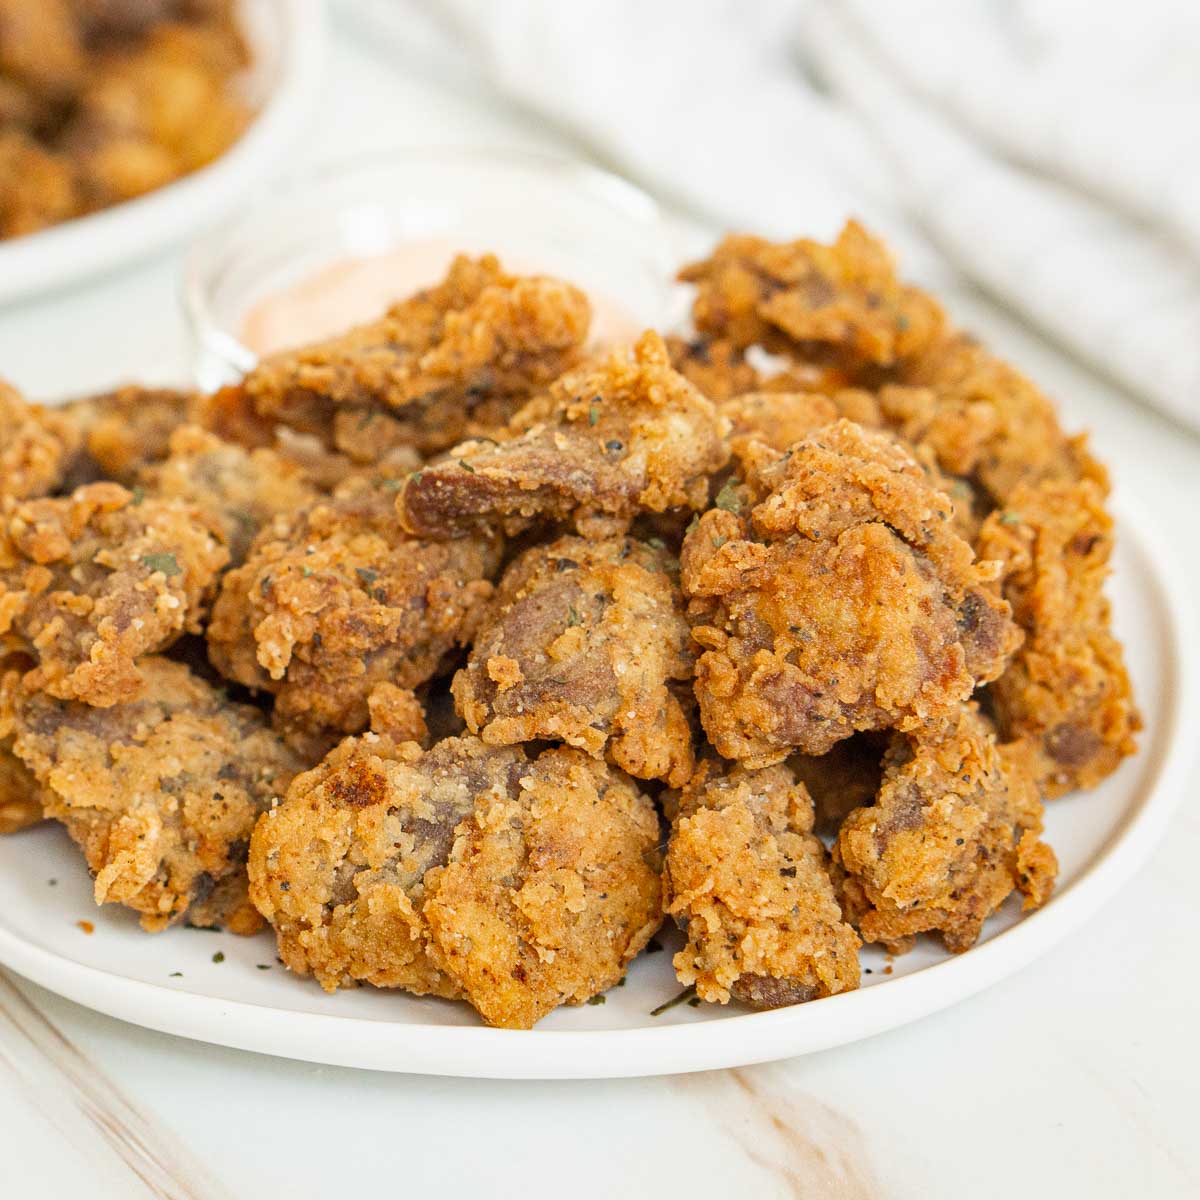 Plate of crispy fried chicken hearts with dip.